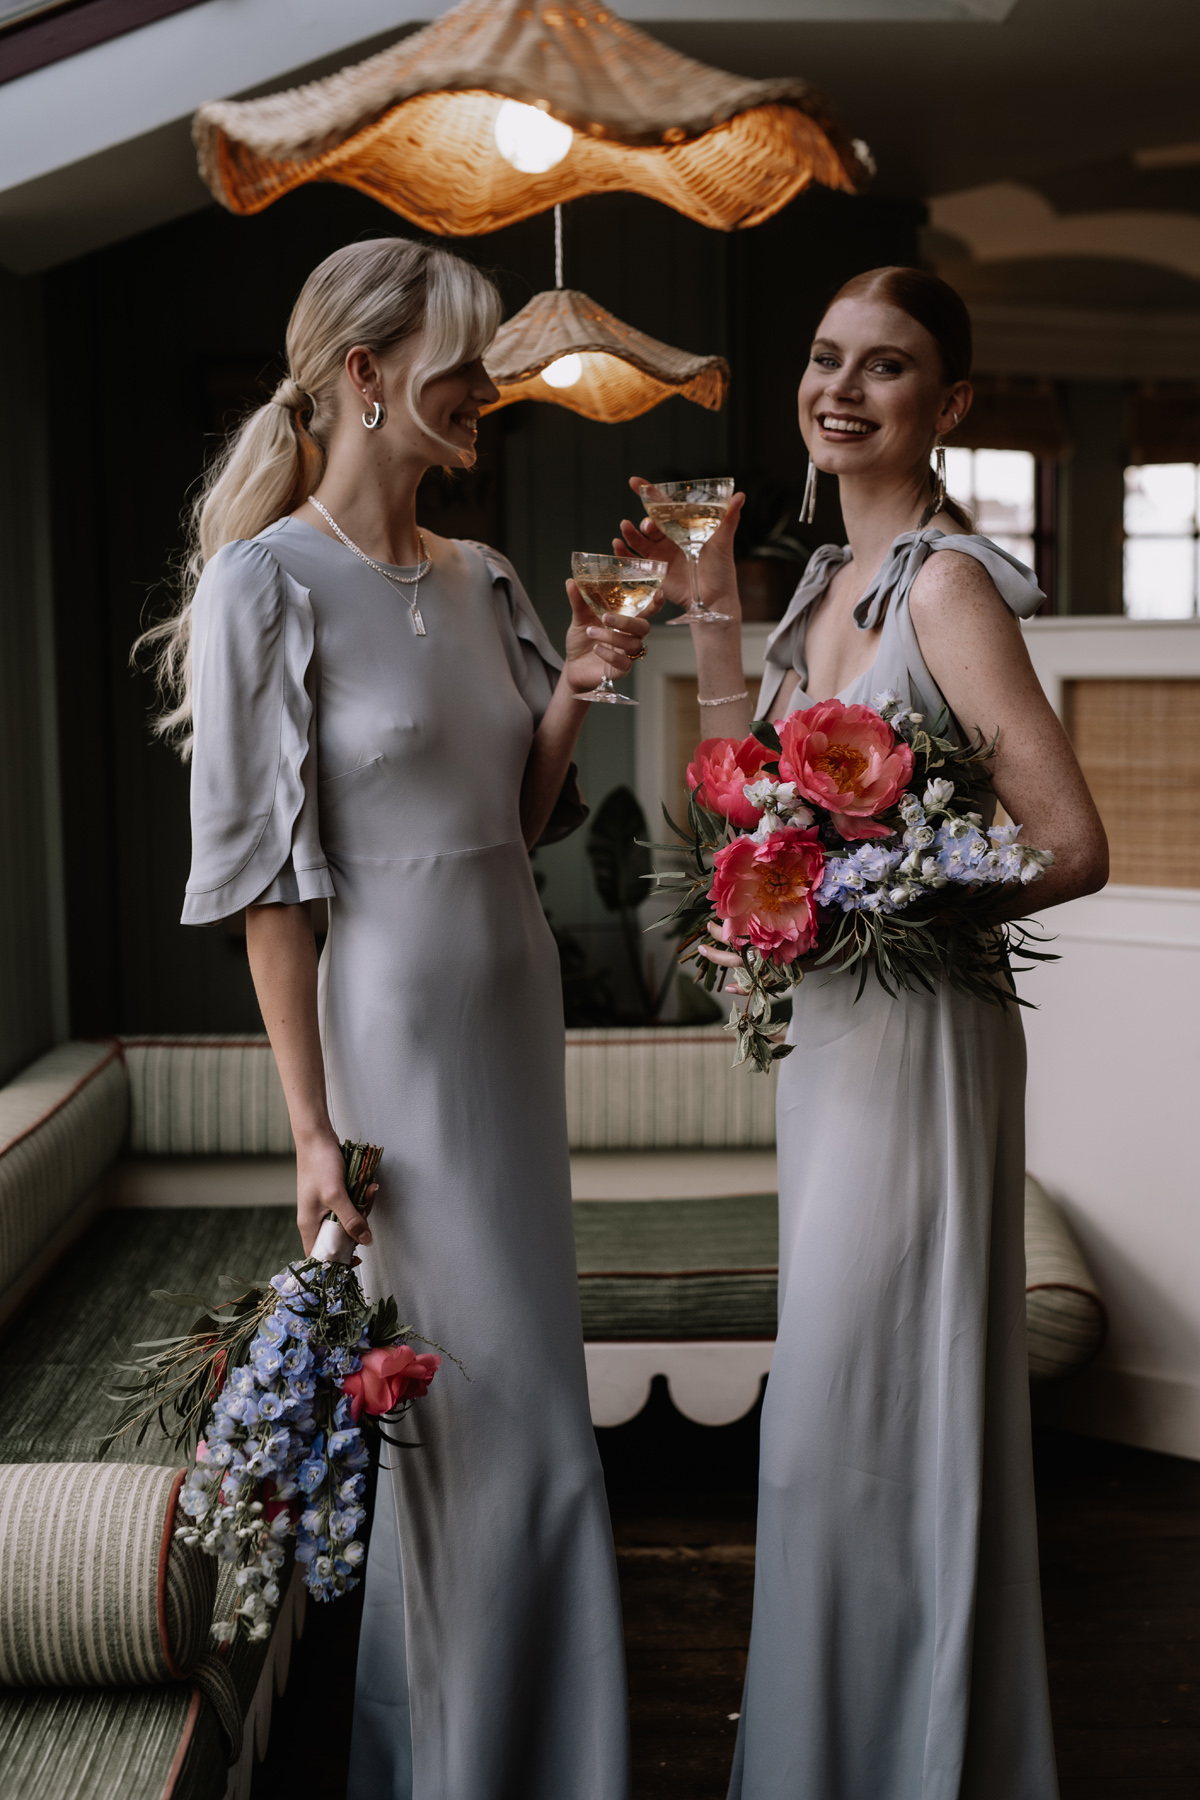 Pale grey bridesmaids dresses by Maids to Measure